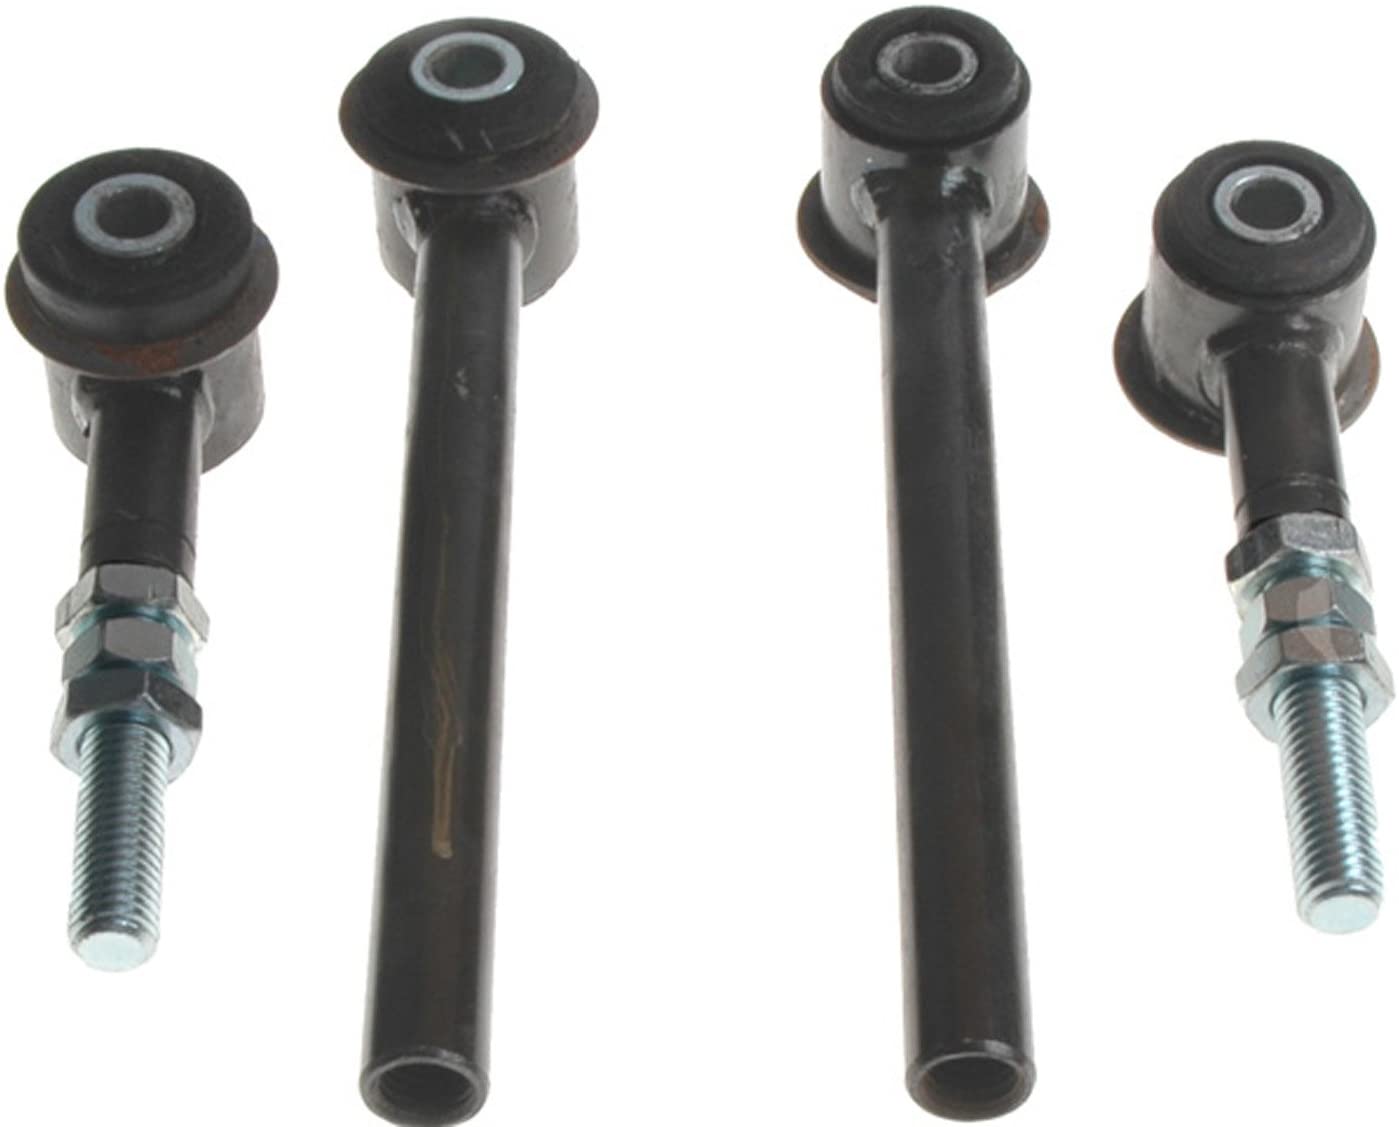 ACDelco 45K0092 Professional Rear Lower Control Arm Adjustor Kit with Bushing